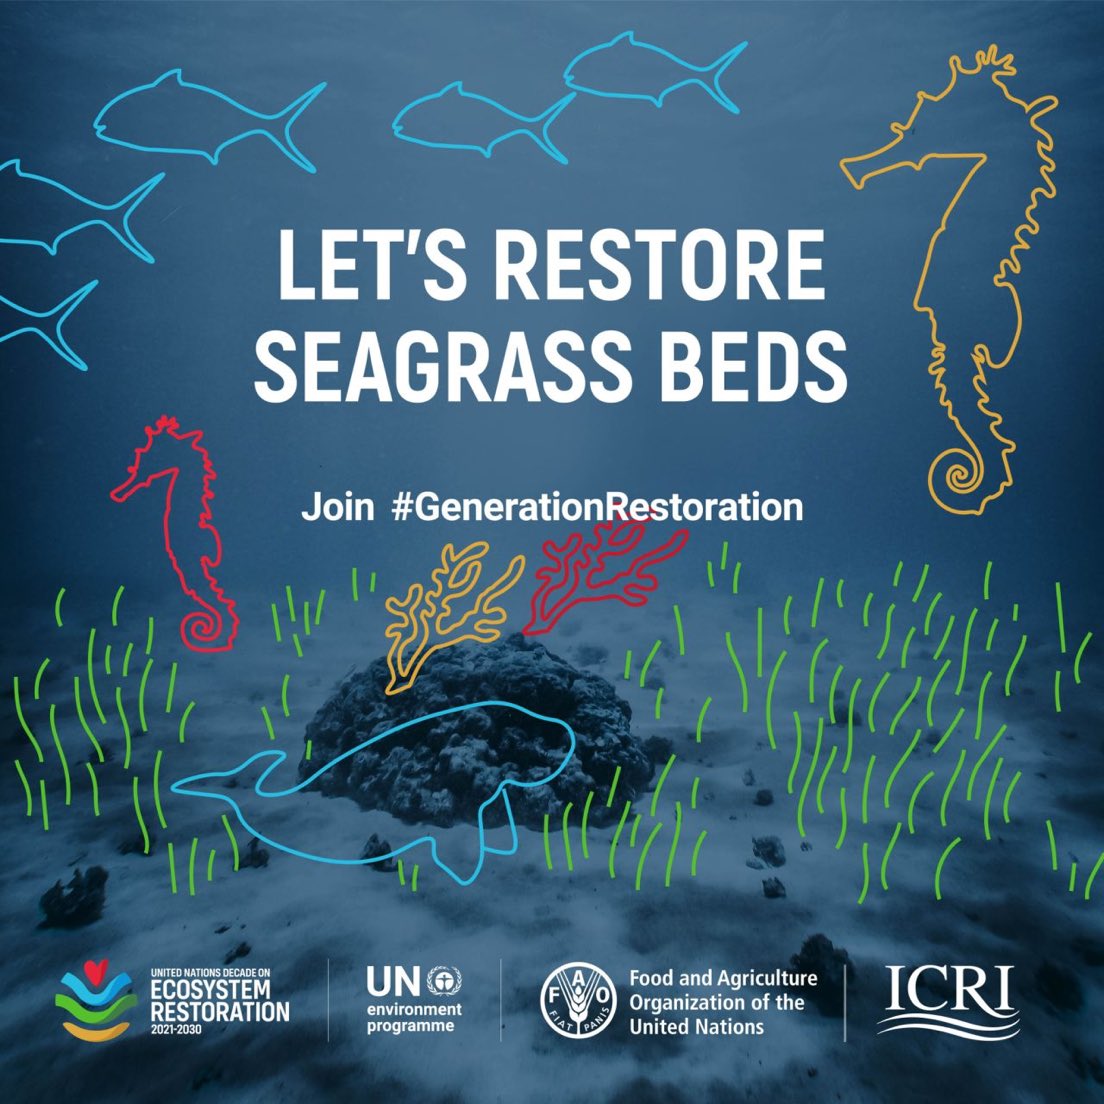 Seagrass is a #climatechampion but continues to face decline with over 30% lost since 1970 📉

ICRI is a proud supporting partner of the @UN Decade on Ecosystem Restoration for #GenerationRestoration, taking action #ForCoral, mangroves & seagrass 🌊

#WorldSeagrassDay